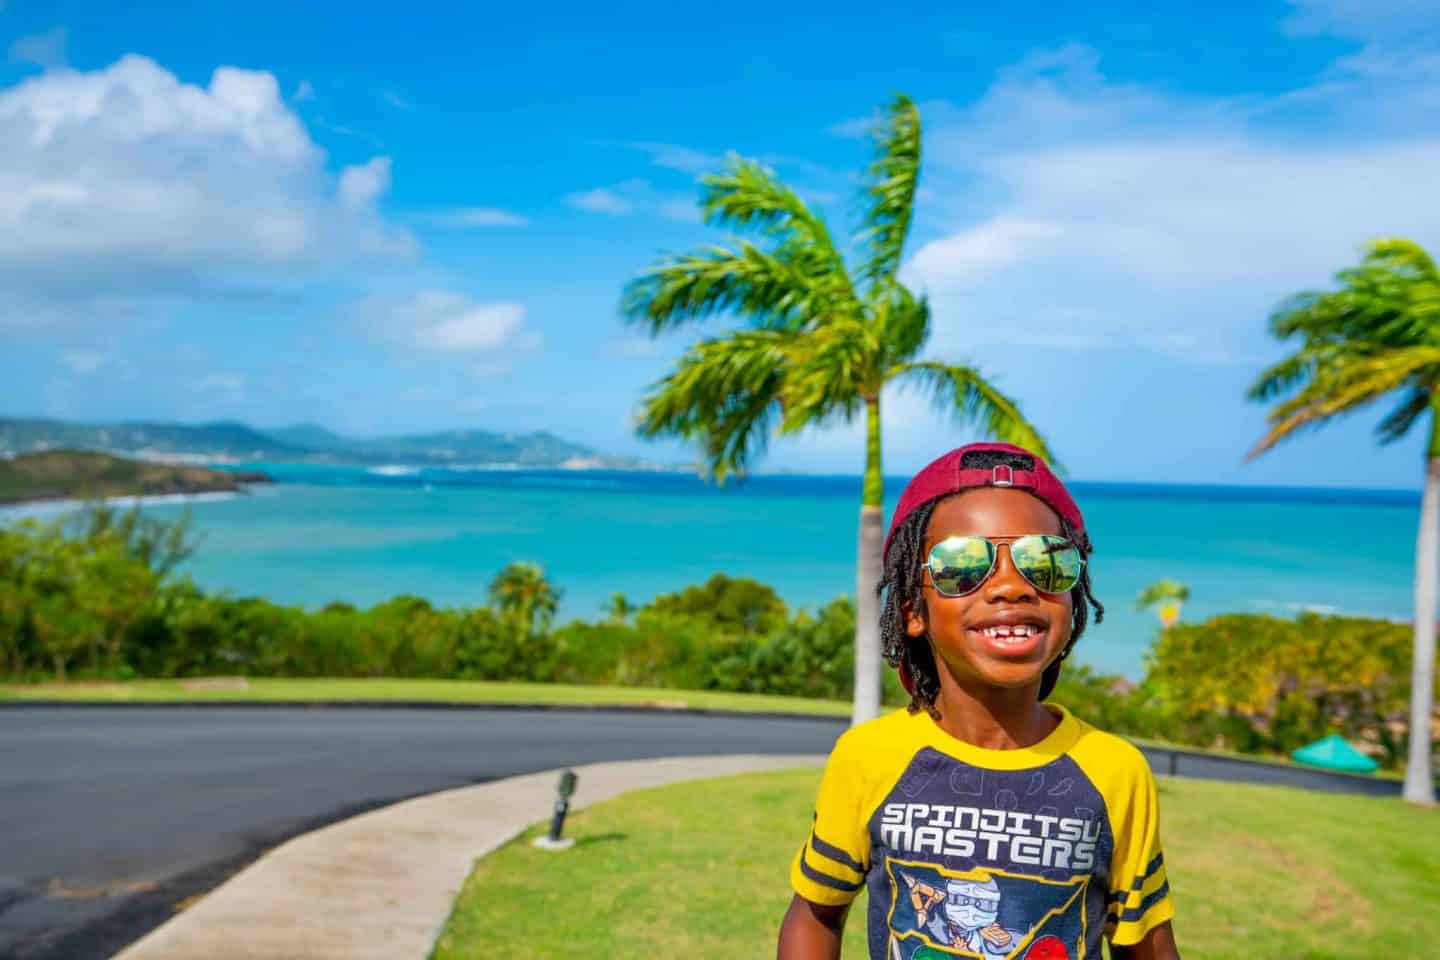 Black Family Travel Things To Do In St Croix Black Family Travel Black Travelers Black Kids Travel Black Family Traveling The World Black Worldschoolers African American Family 37